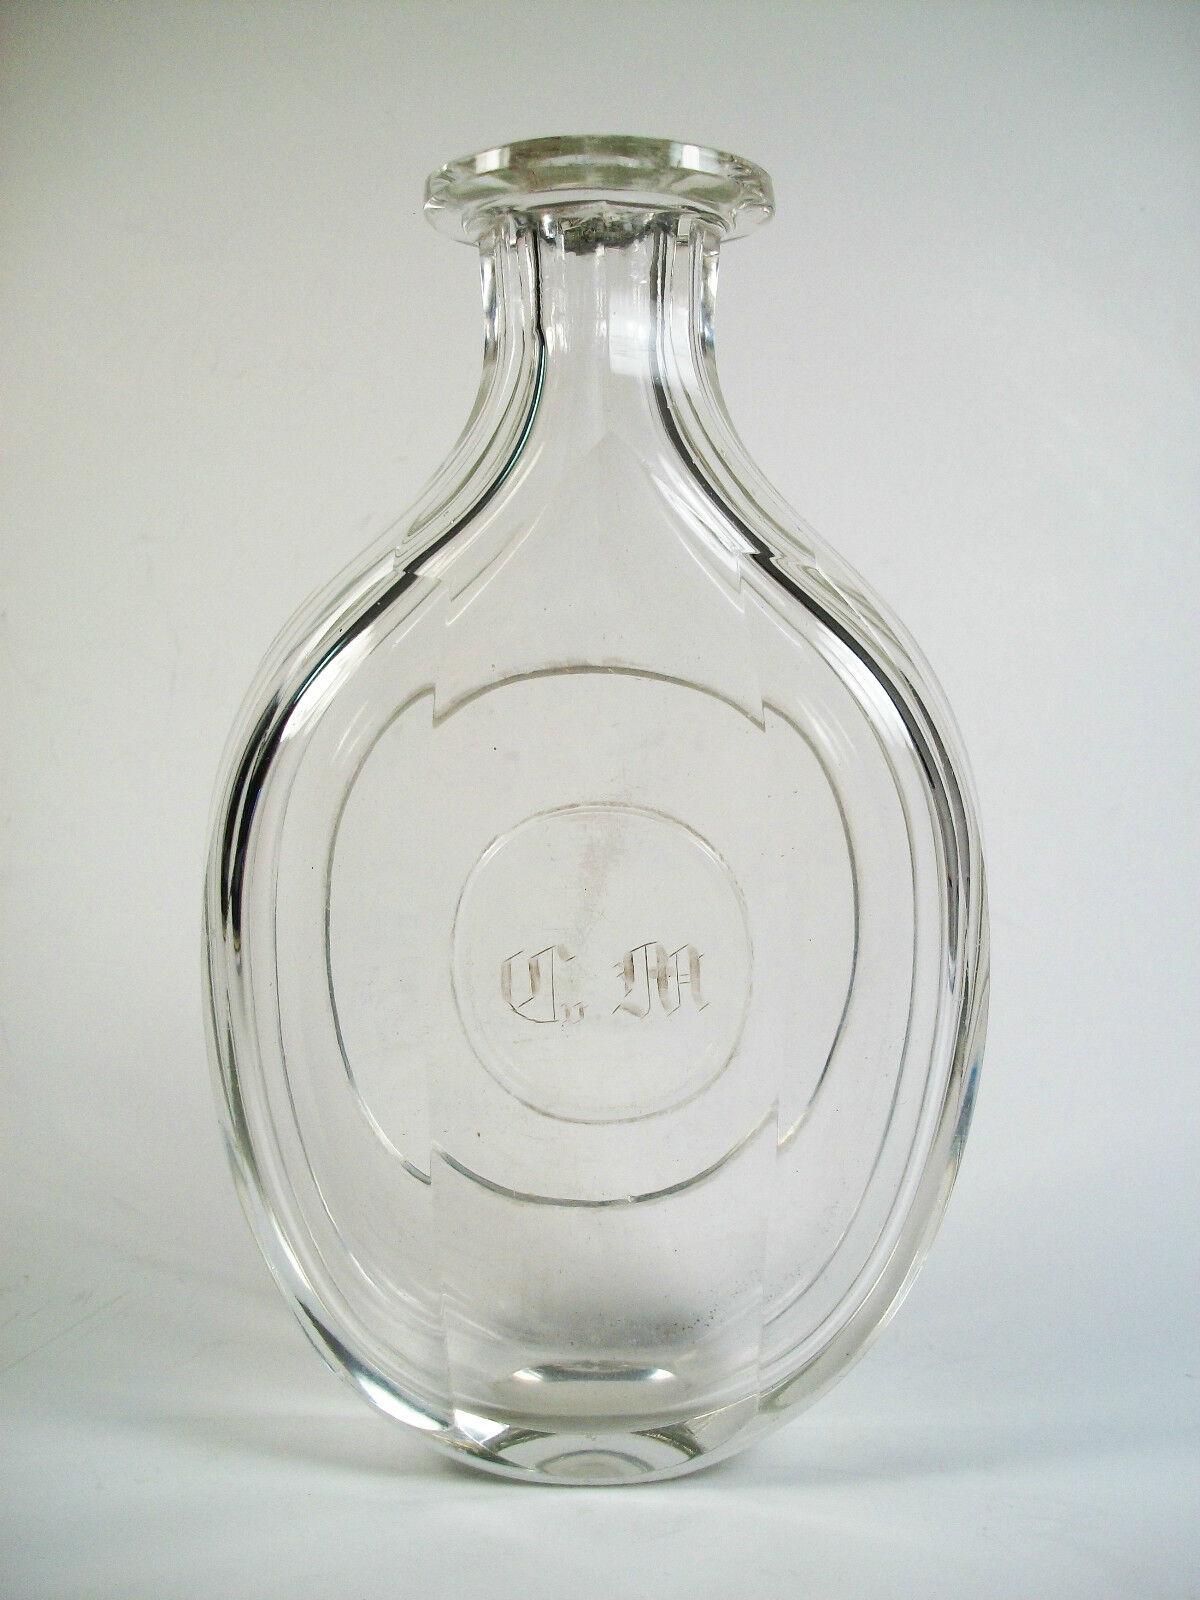 Antique - Georgian period - large wheel cut faceted glass dressing table bottle - Cv.M - monogram in Old English script - United Kingdom (likely) - late 18th/early 19th century.

Good antique condition - missing stopper - surface scratches that